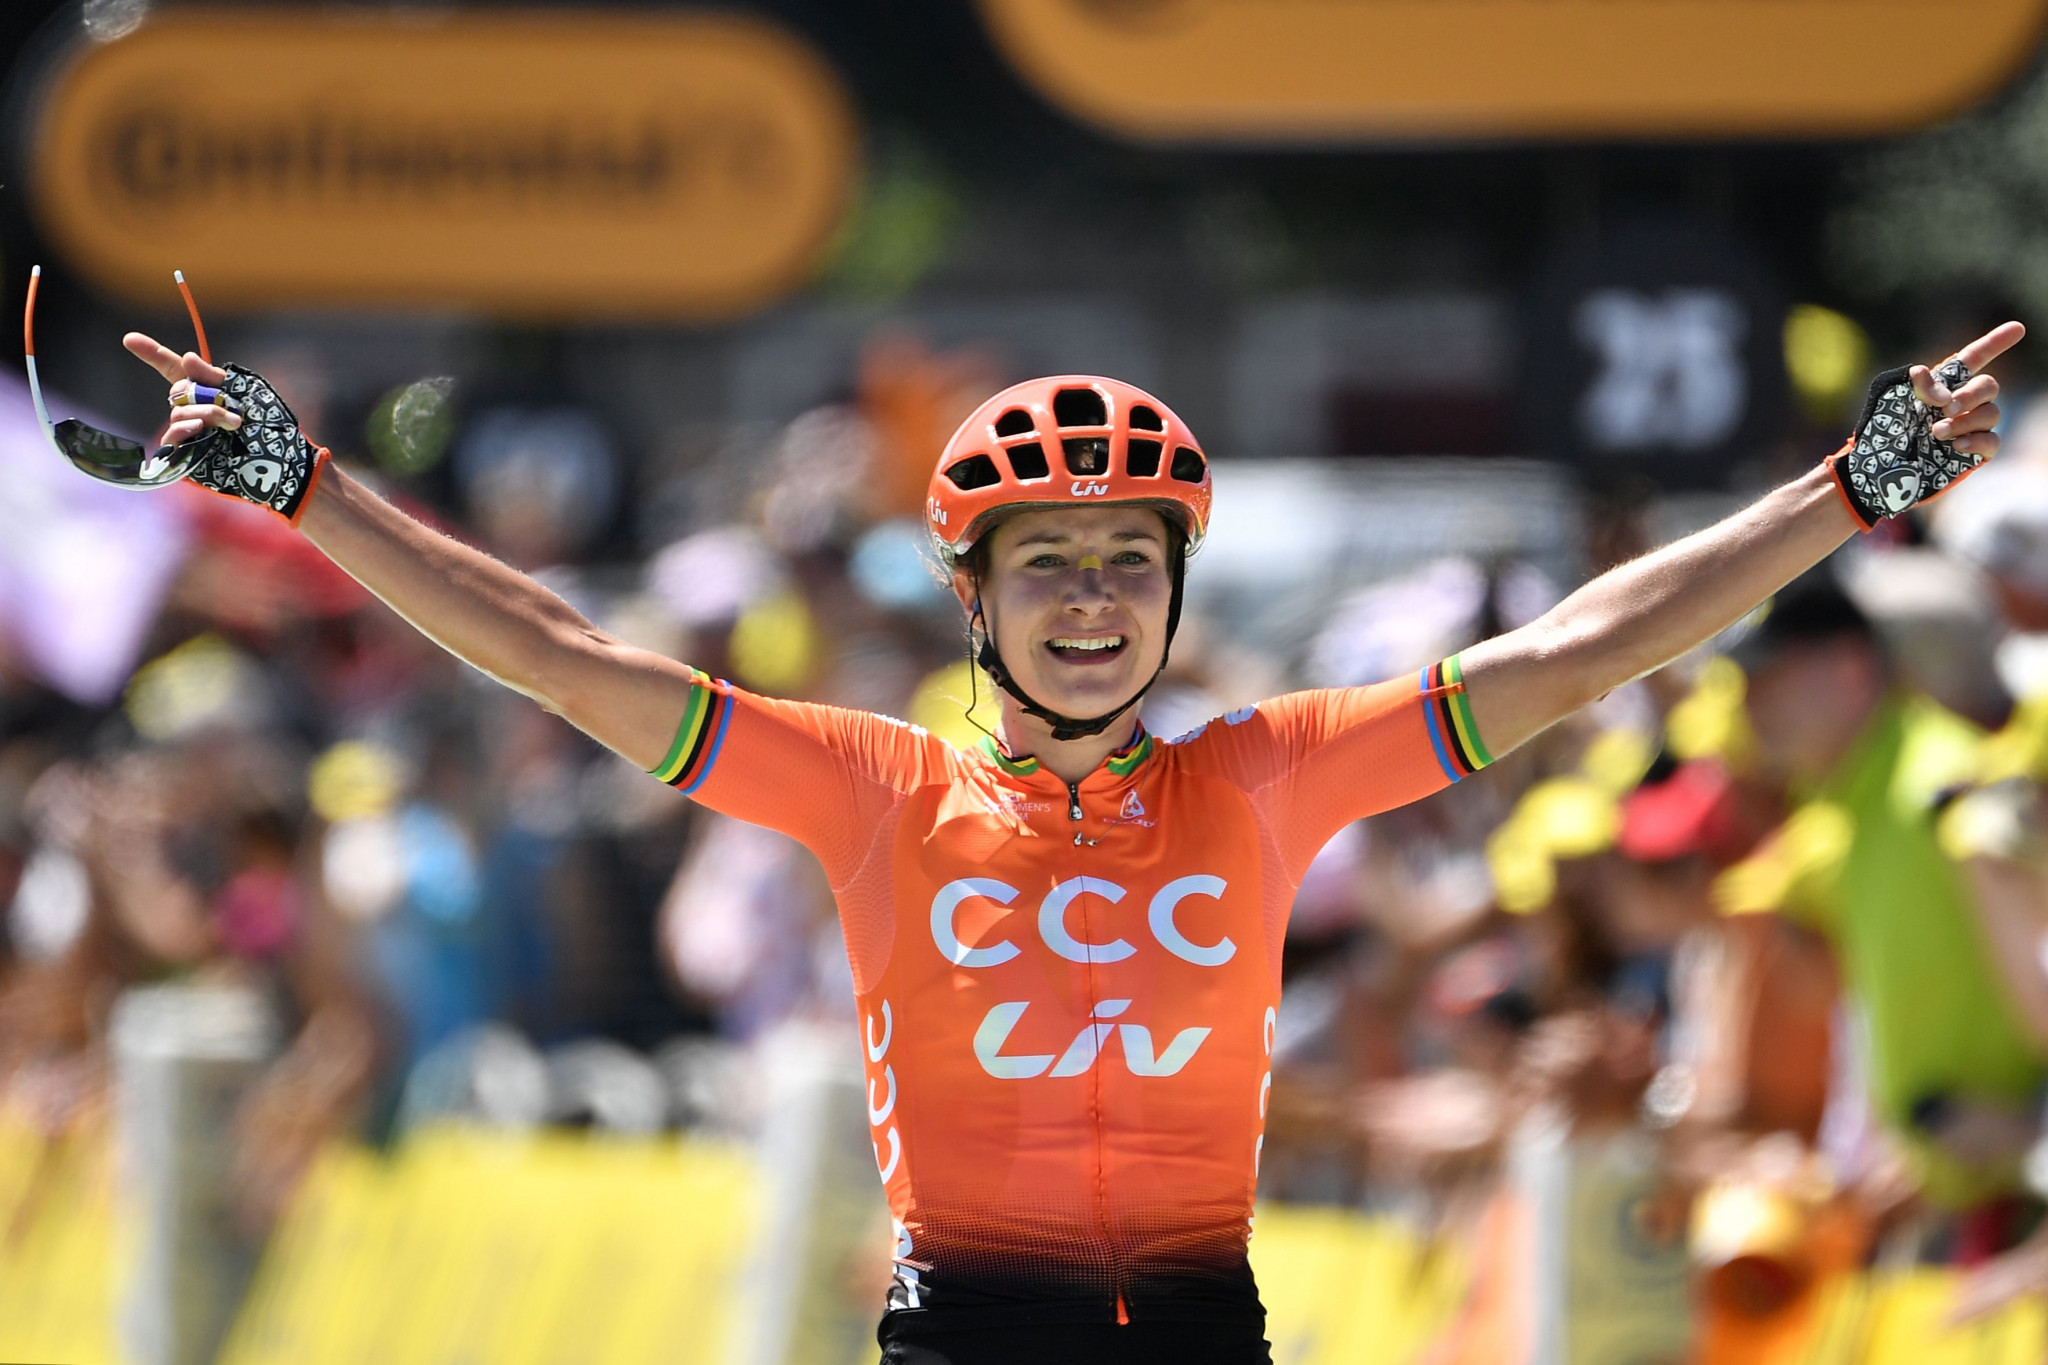 Vos claims 27th stage Giro Rosa win as van Vleuten retains overall lead